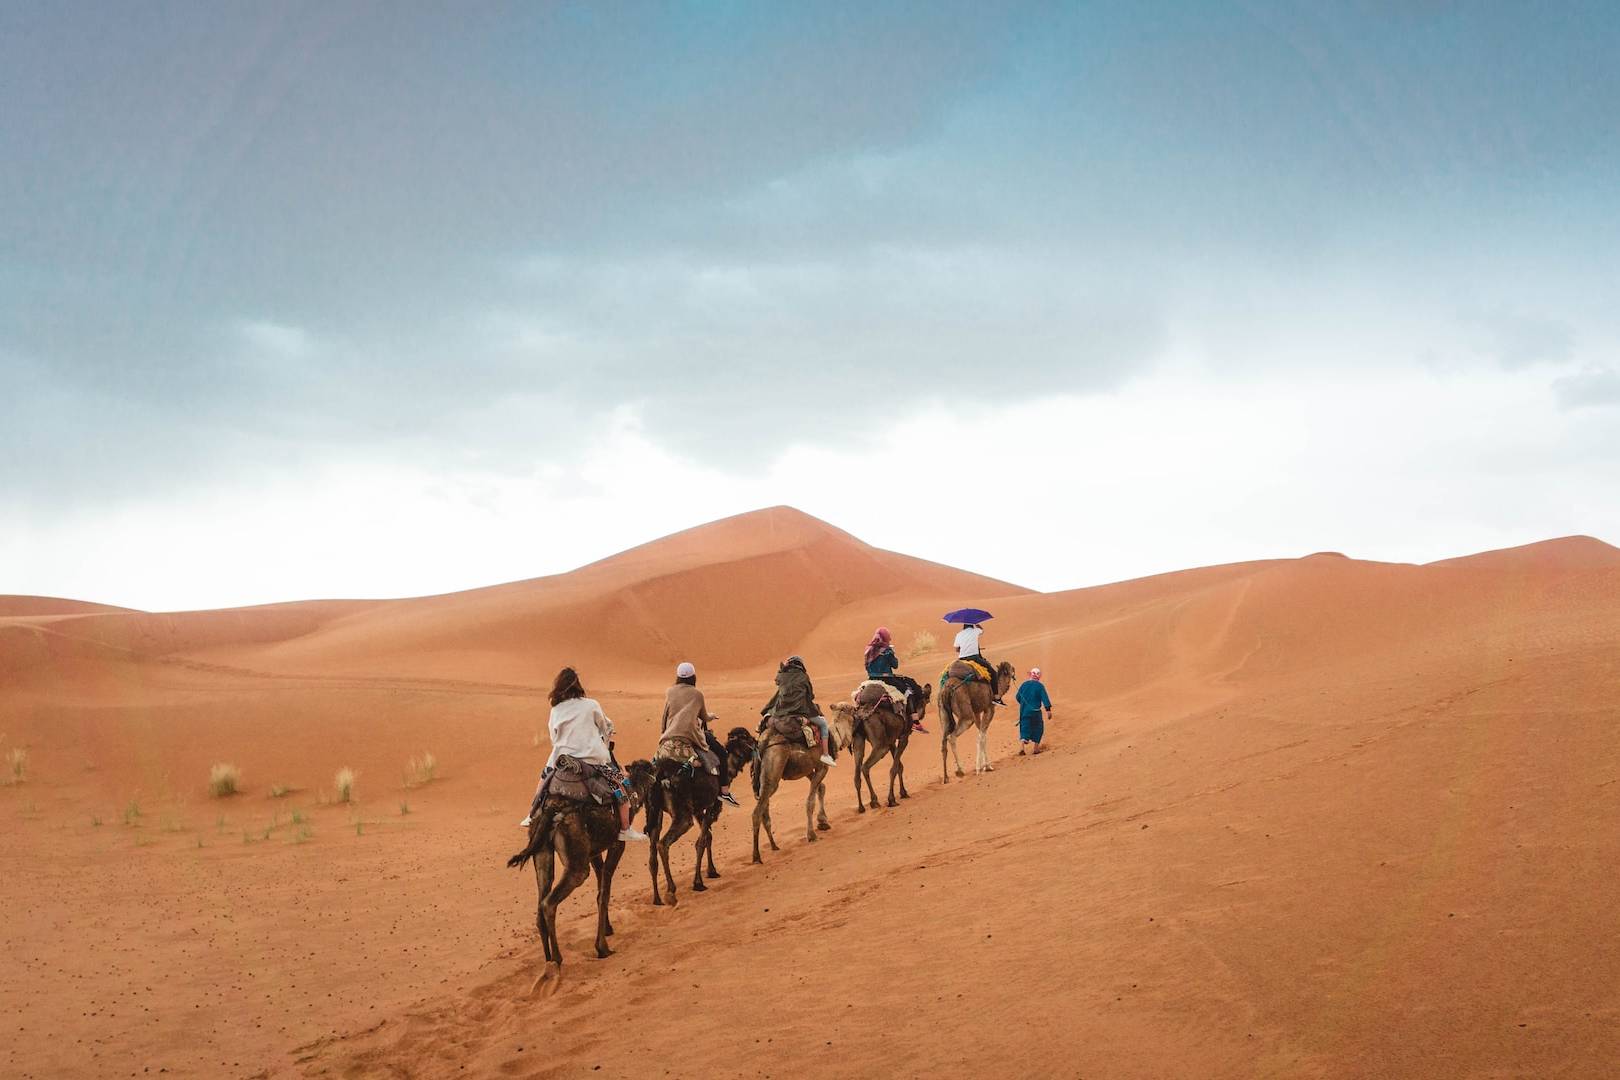 group of people riding camels on desert